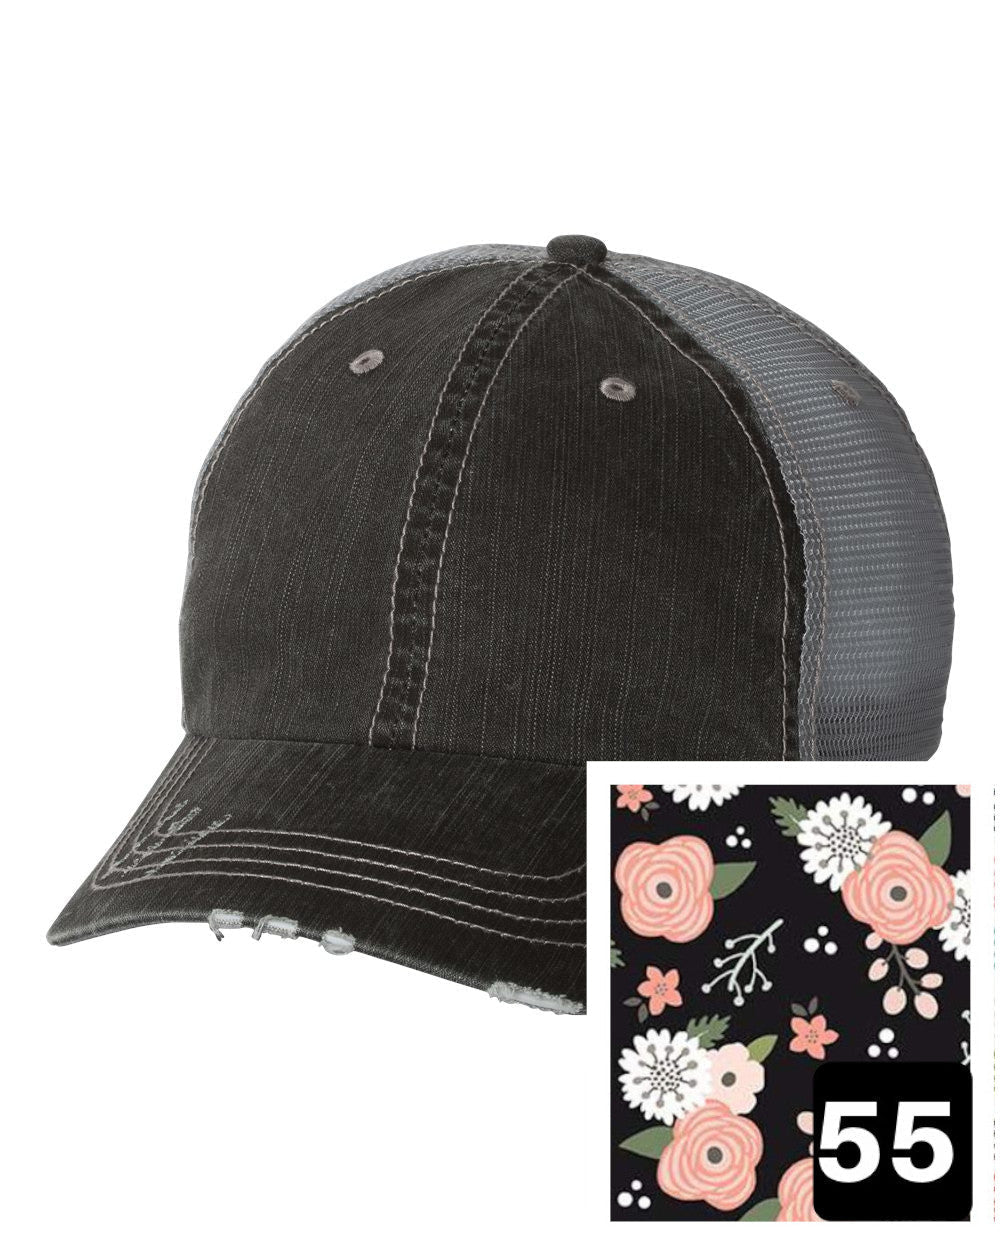 gray distressed trucker hat with petite floral on navy fabric state of Oregon